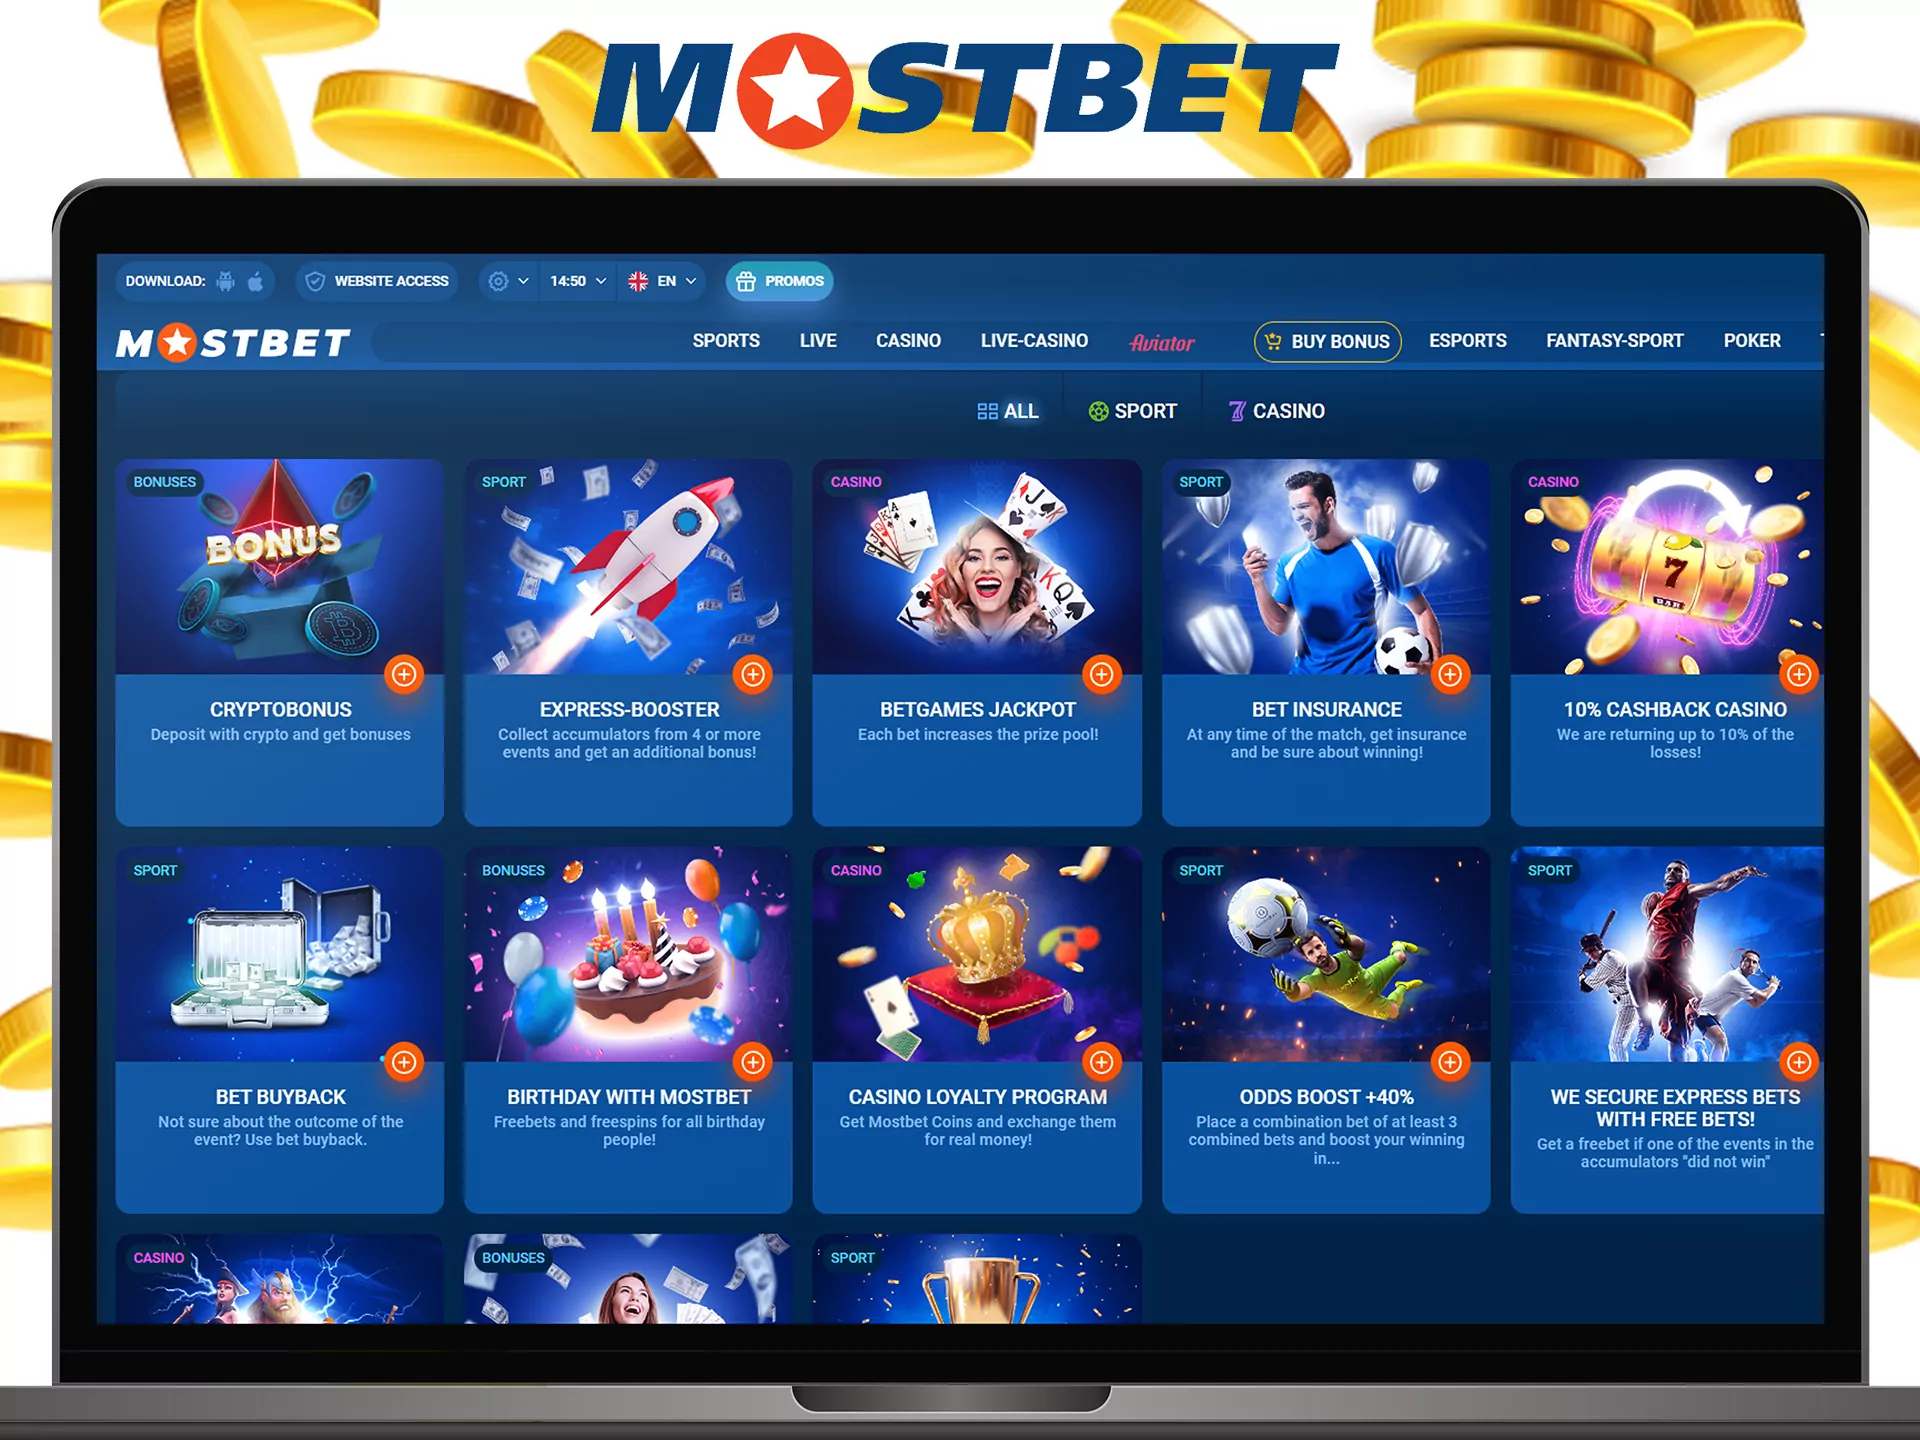 Use all of the Mostbet bonuses and promotions.